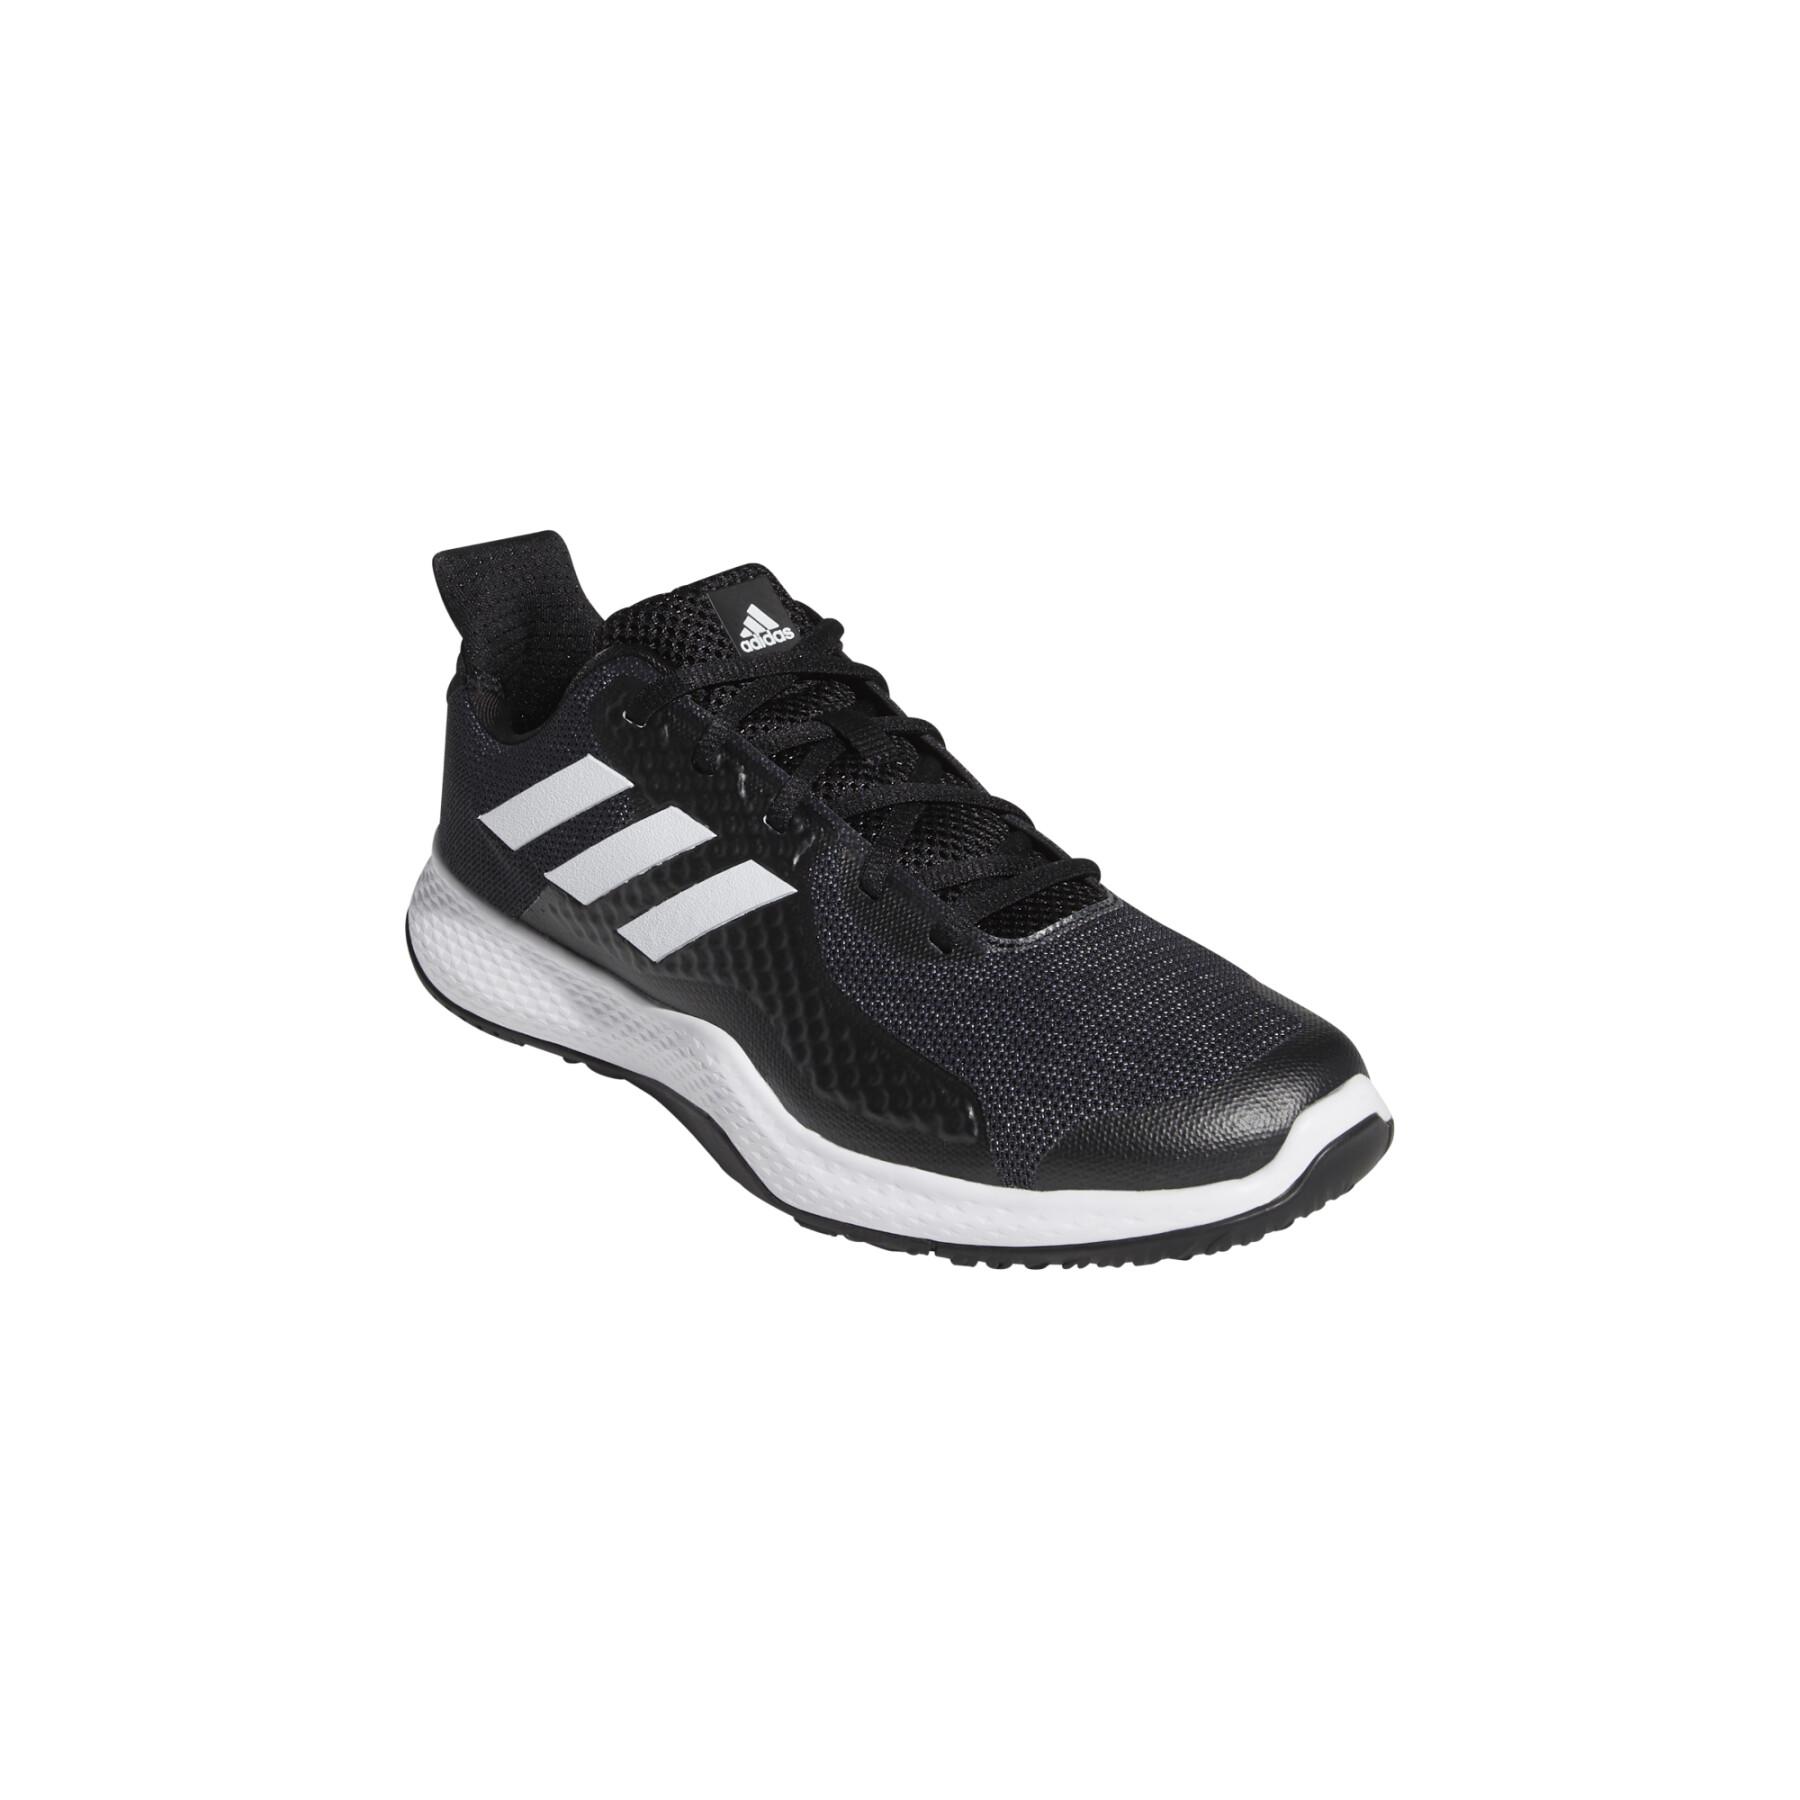 Chaussures femme adidas FitBounce Trainers